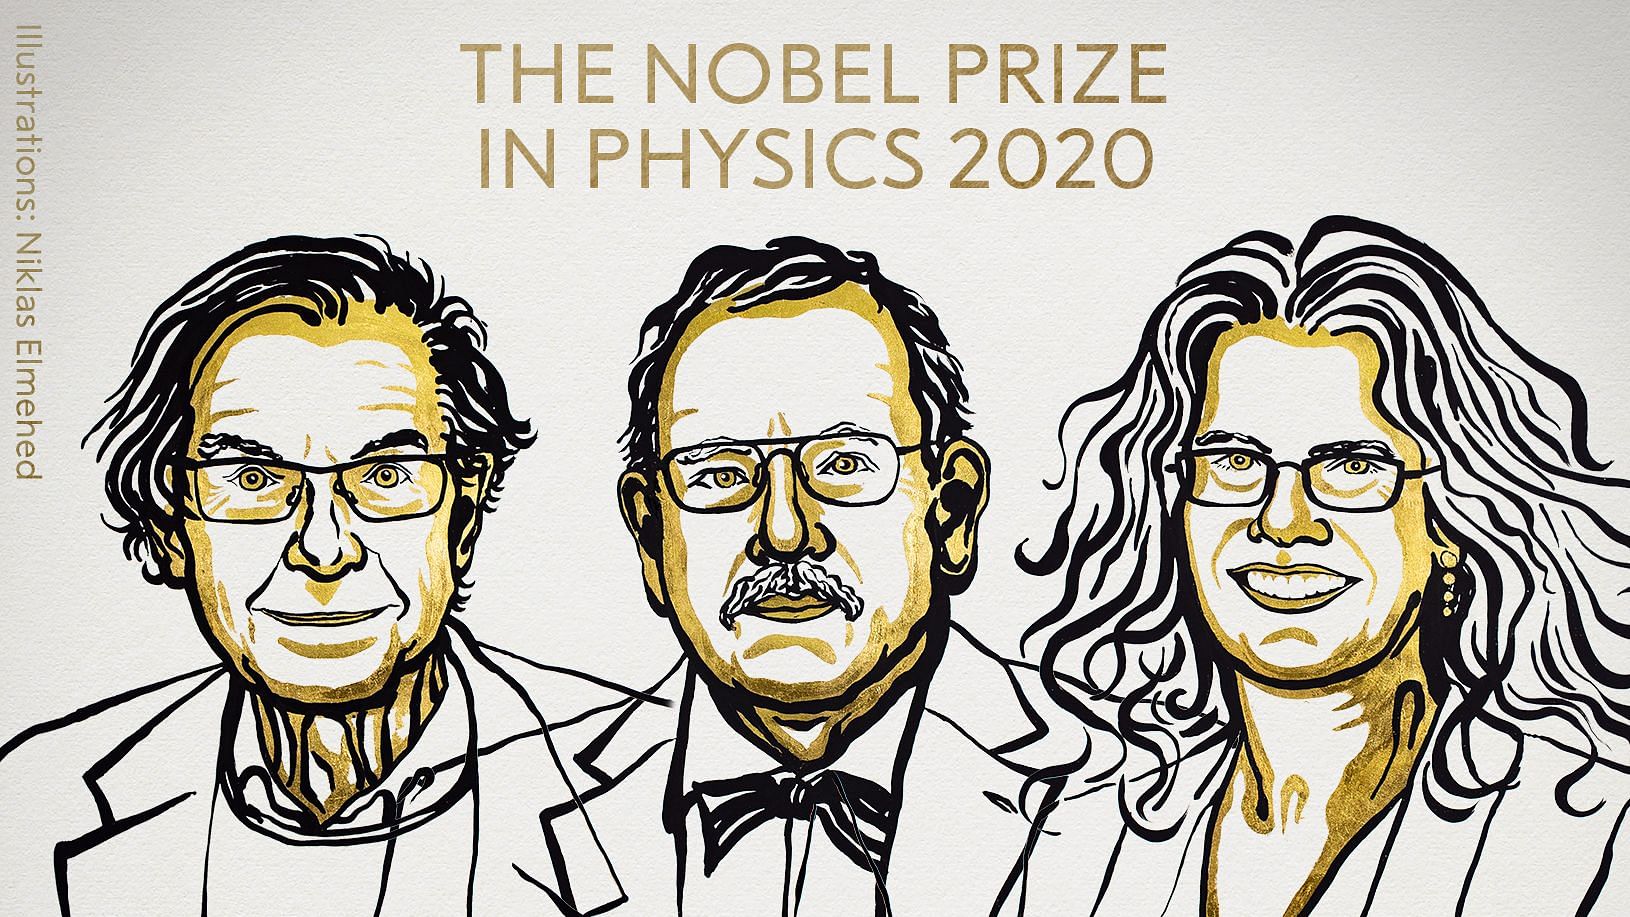 The Royal Swedish Academy of Sciences on Tuesday, 6 October, announced that it has decided to award the 2020 Nobel Prize in Physics with one half to Roger Penrose and the other half jointly to Reinhard Genzel and Andrea Ghez.